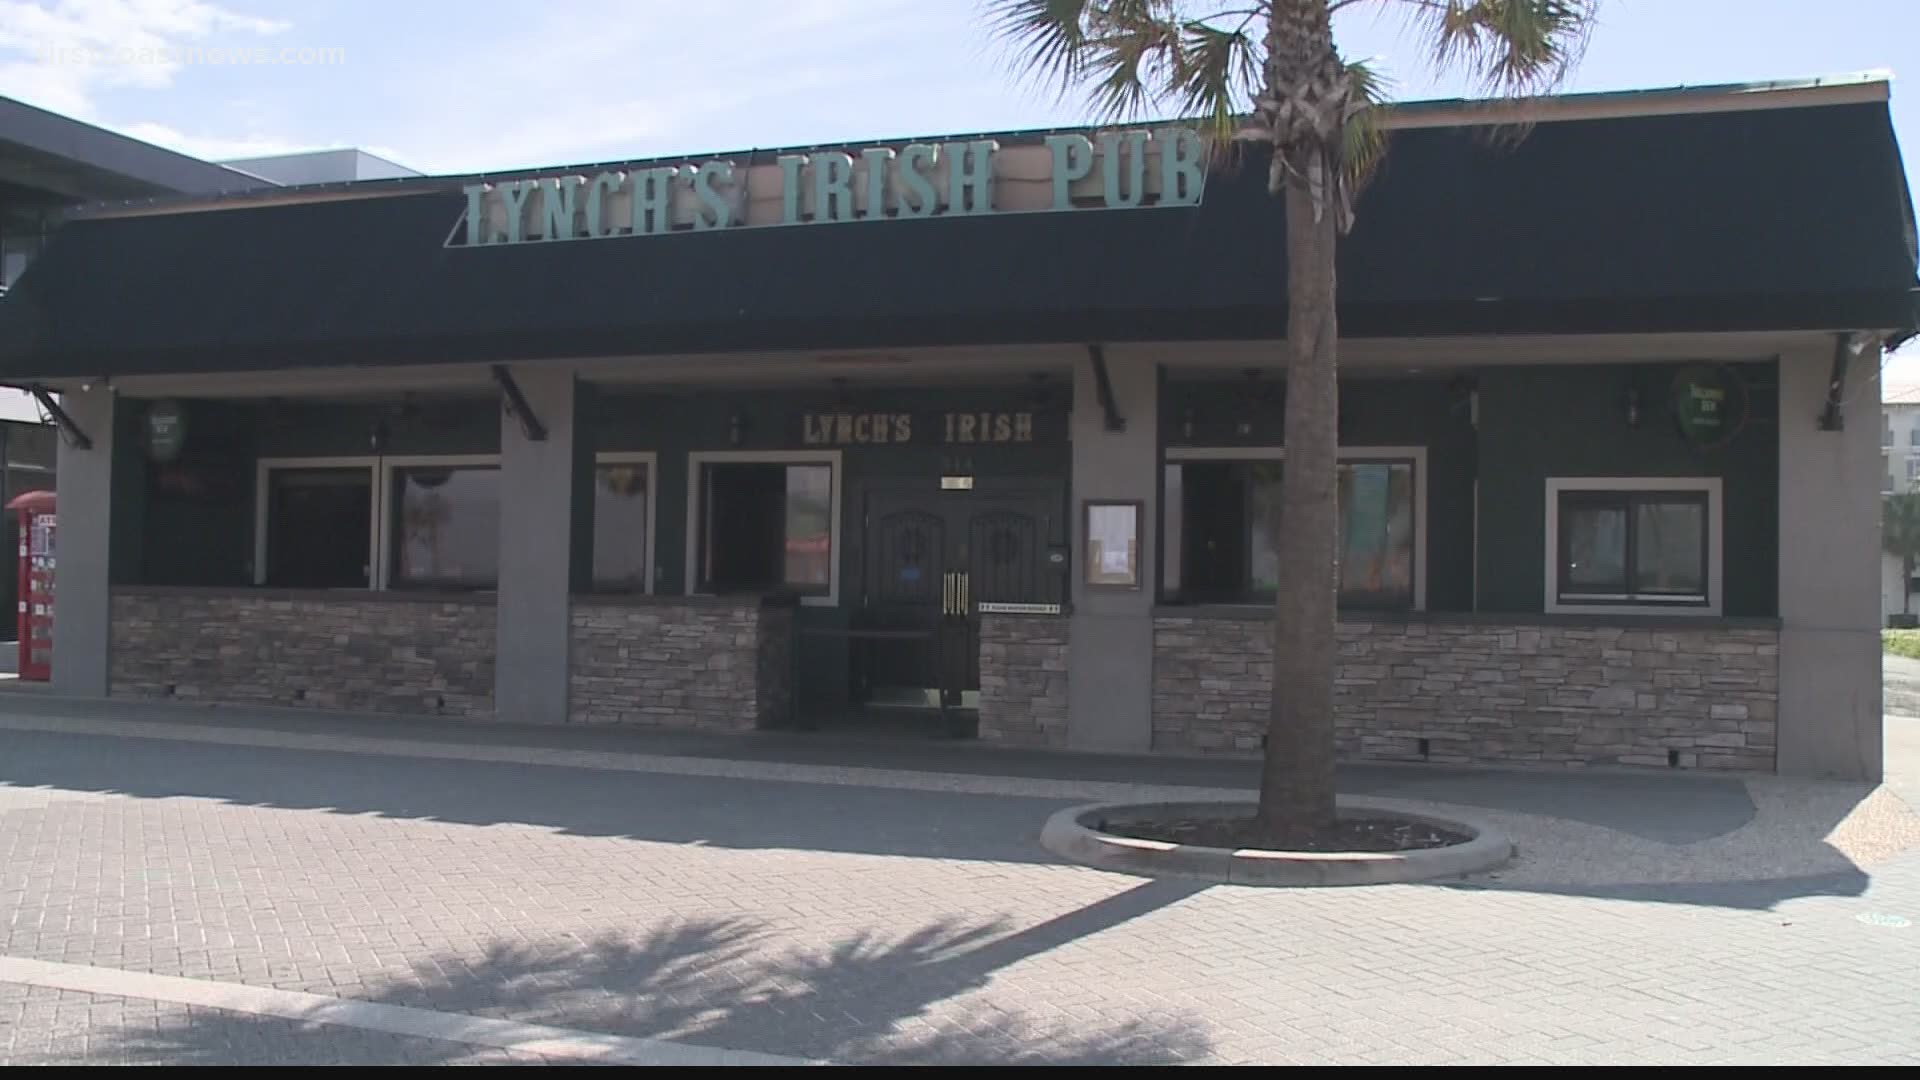 First Coast News has been told Lynch's Irish Pub in Jacksonville Beach is closed for cleaning.